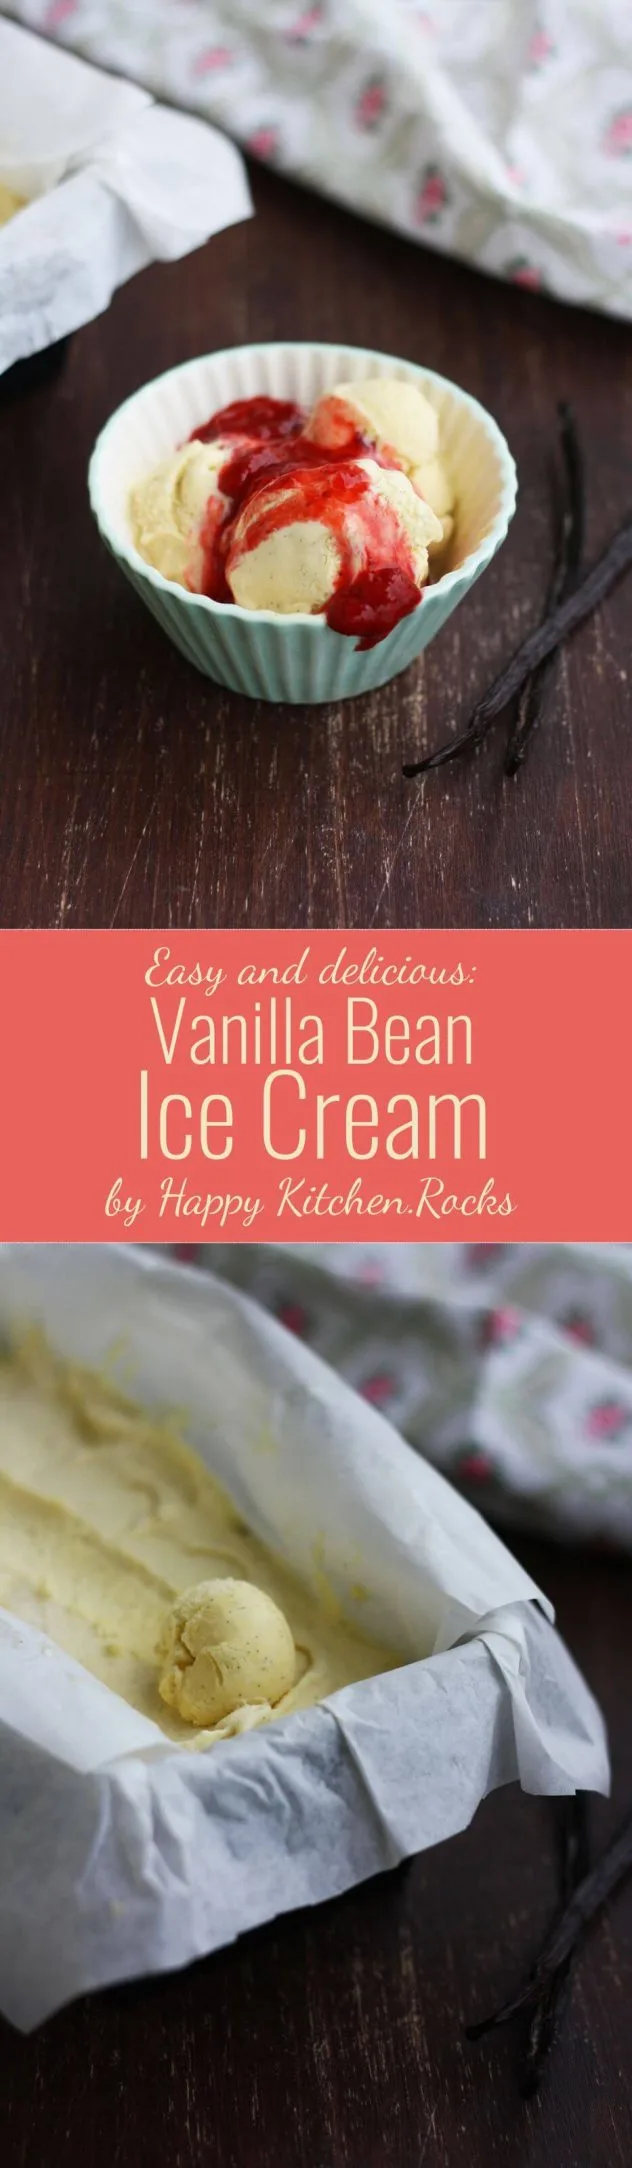 Easy, delicious, velvety and smooth homemade vanilla bean ice cream recipe. All you need to know to make your own vanilla ice cream dessert from 5 ingredients with no refined sugar!